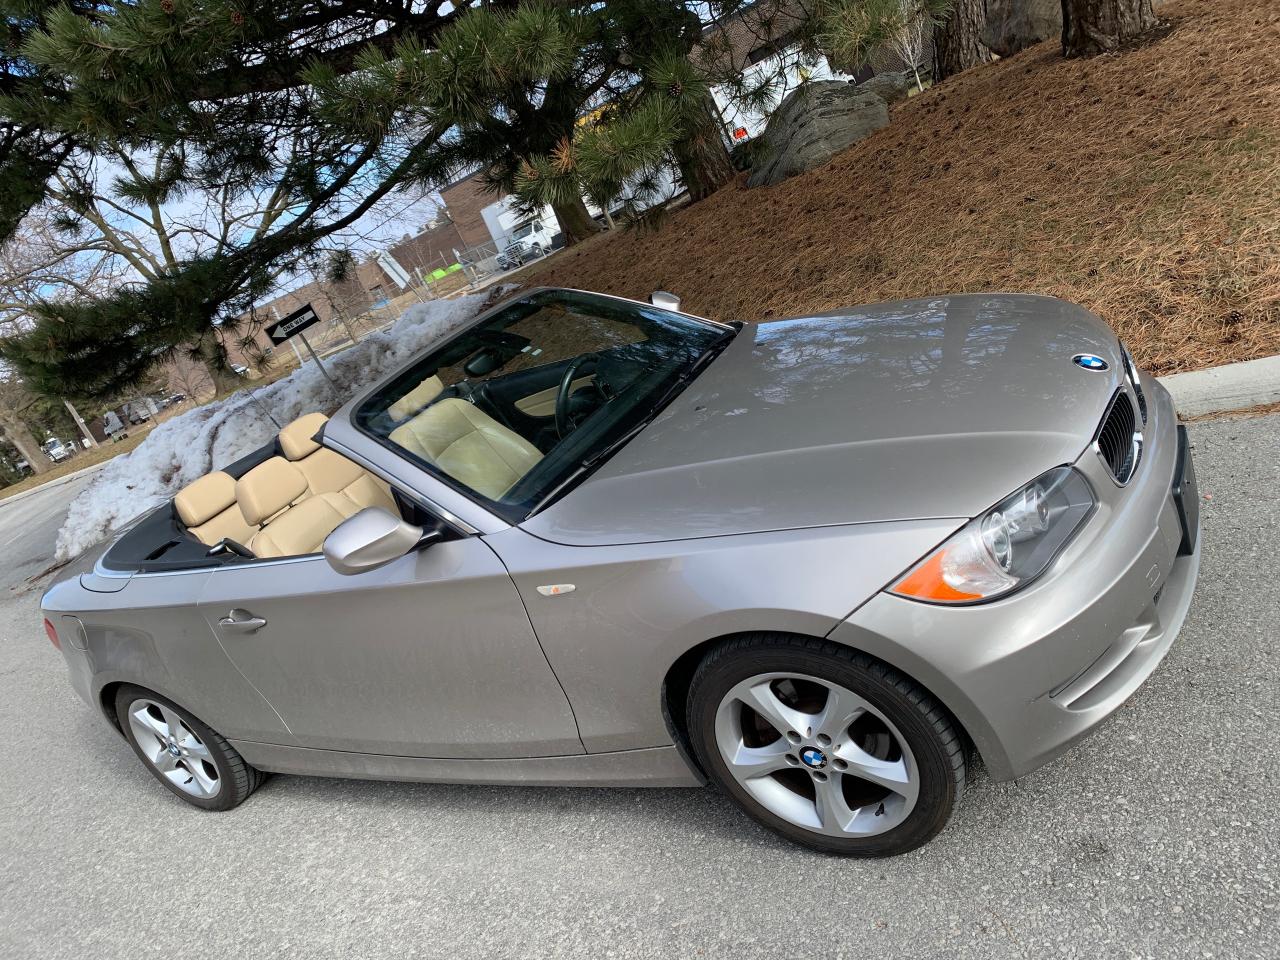 2011 BMW 1 Series 128i CONVERTIBLE-CABRIOLET-ONLY 109K KMS!! $10,990.00!! - Photo #1